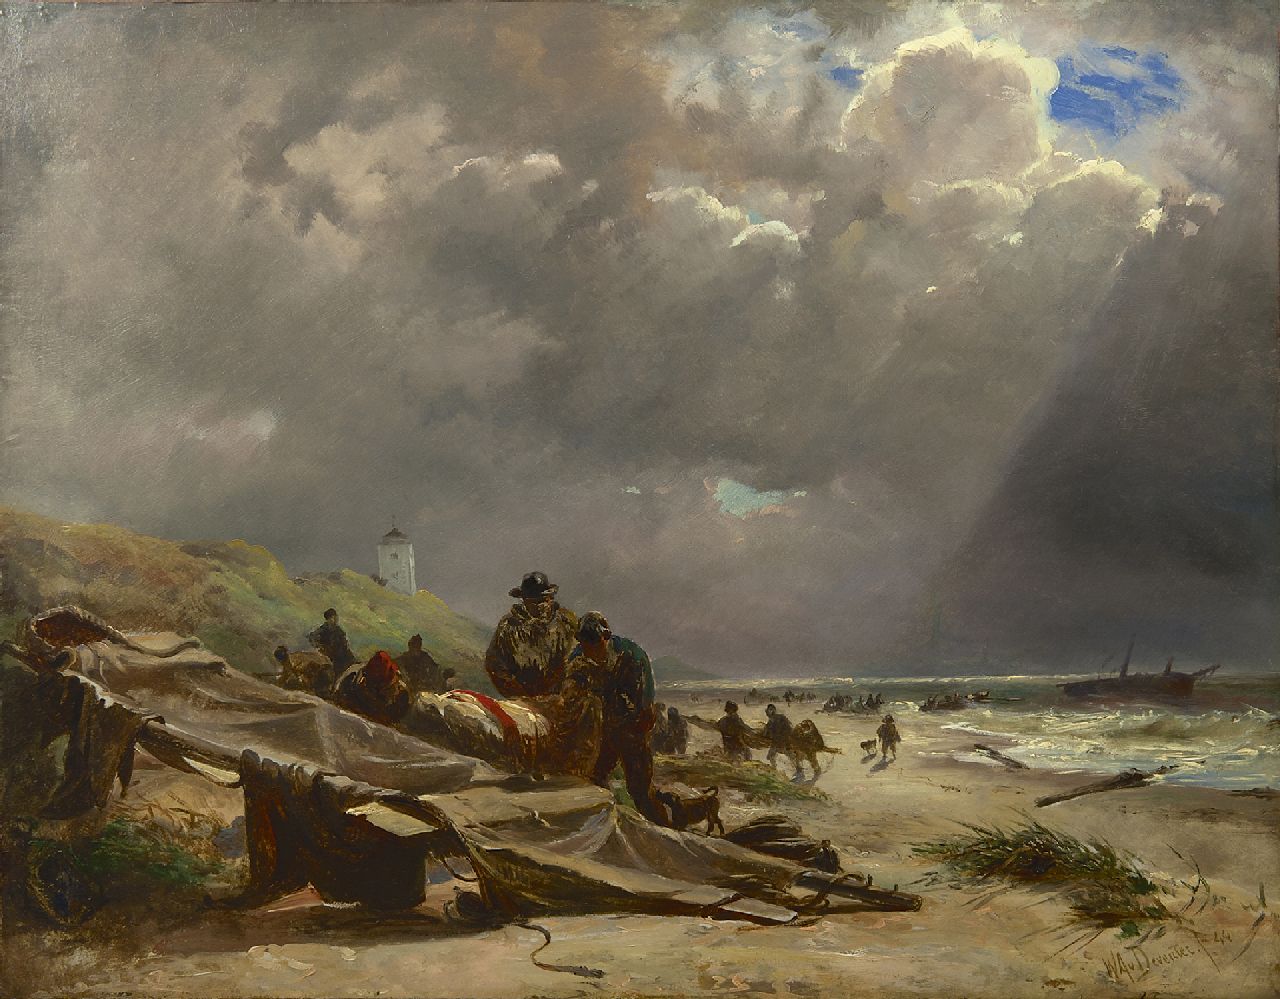 Deventer W.A. van | 'Willem' Anthonie van Deventer | Paintings offered for sale | Shipwreck on the beach of Katwijk, oil on paper laid down on painter's board 46.3 x 59.6 cm, signed l.r. and dated '44